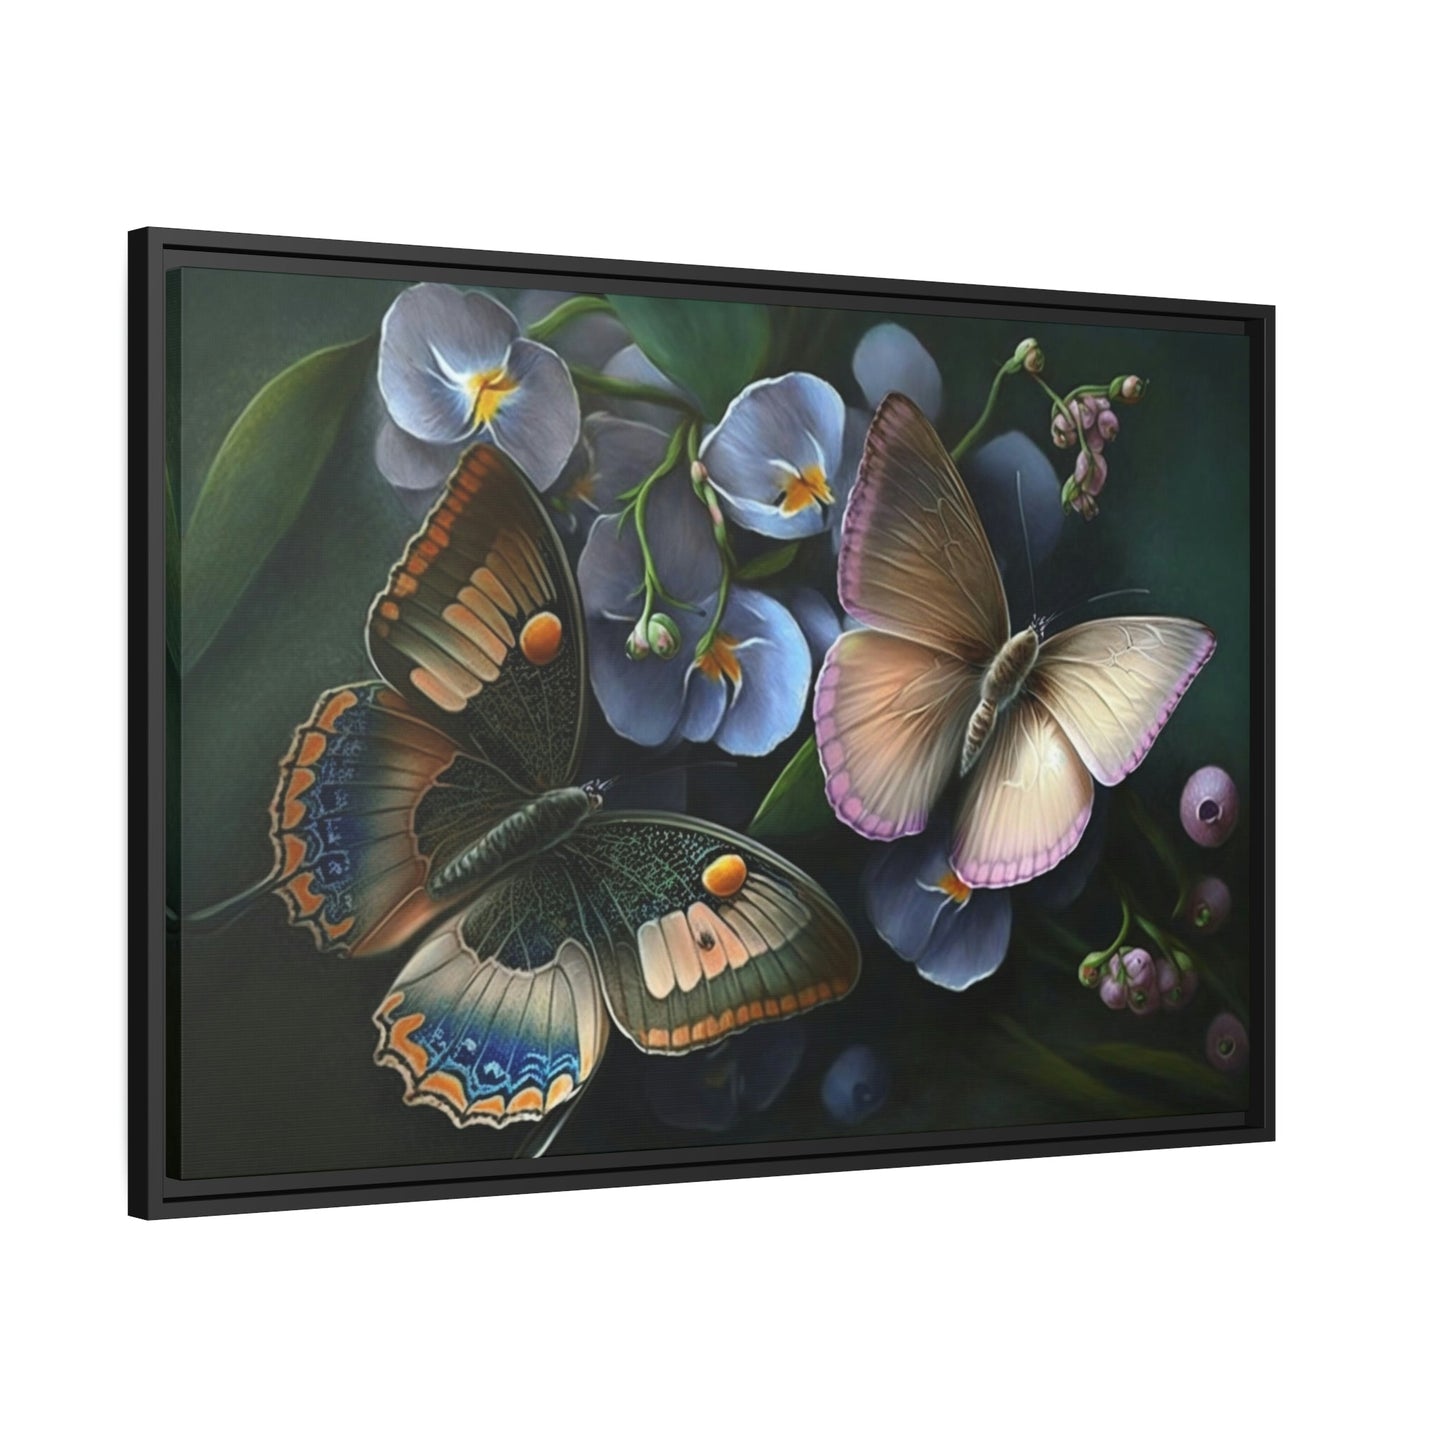 Butterfly Garden: Framed Canvas & Poster Art Print of Fluttering Insects